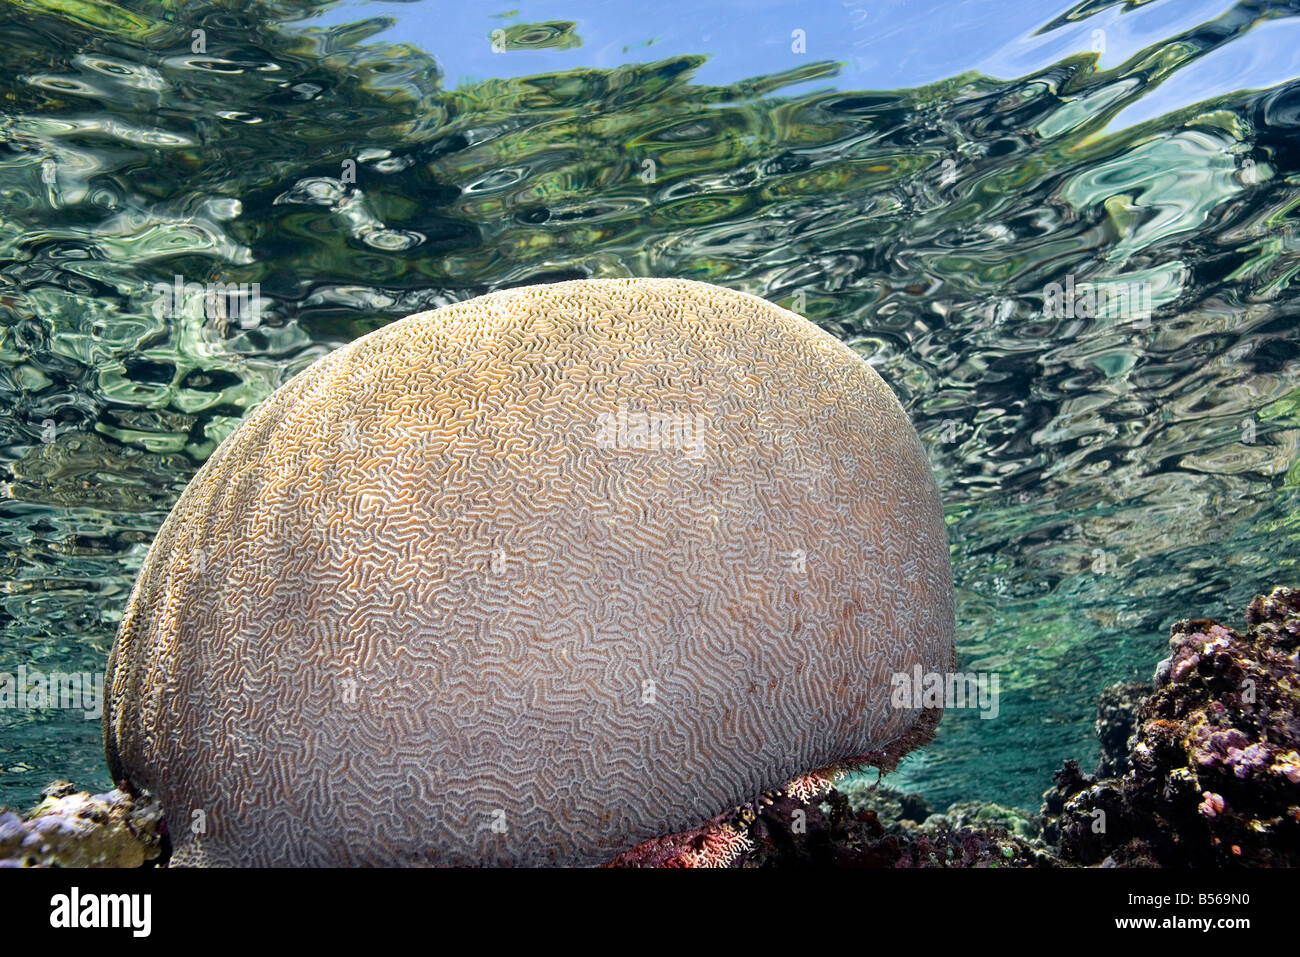 Brain Coral in shallow water with the sky and trees reflected in the water Stock Photo